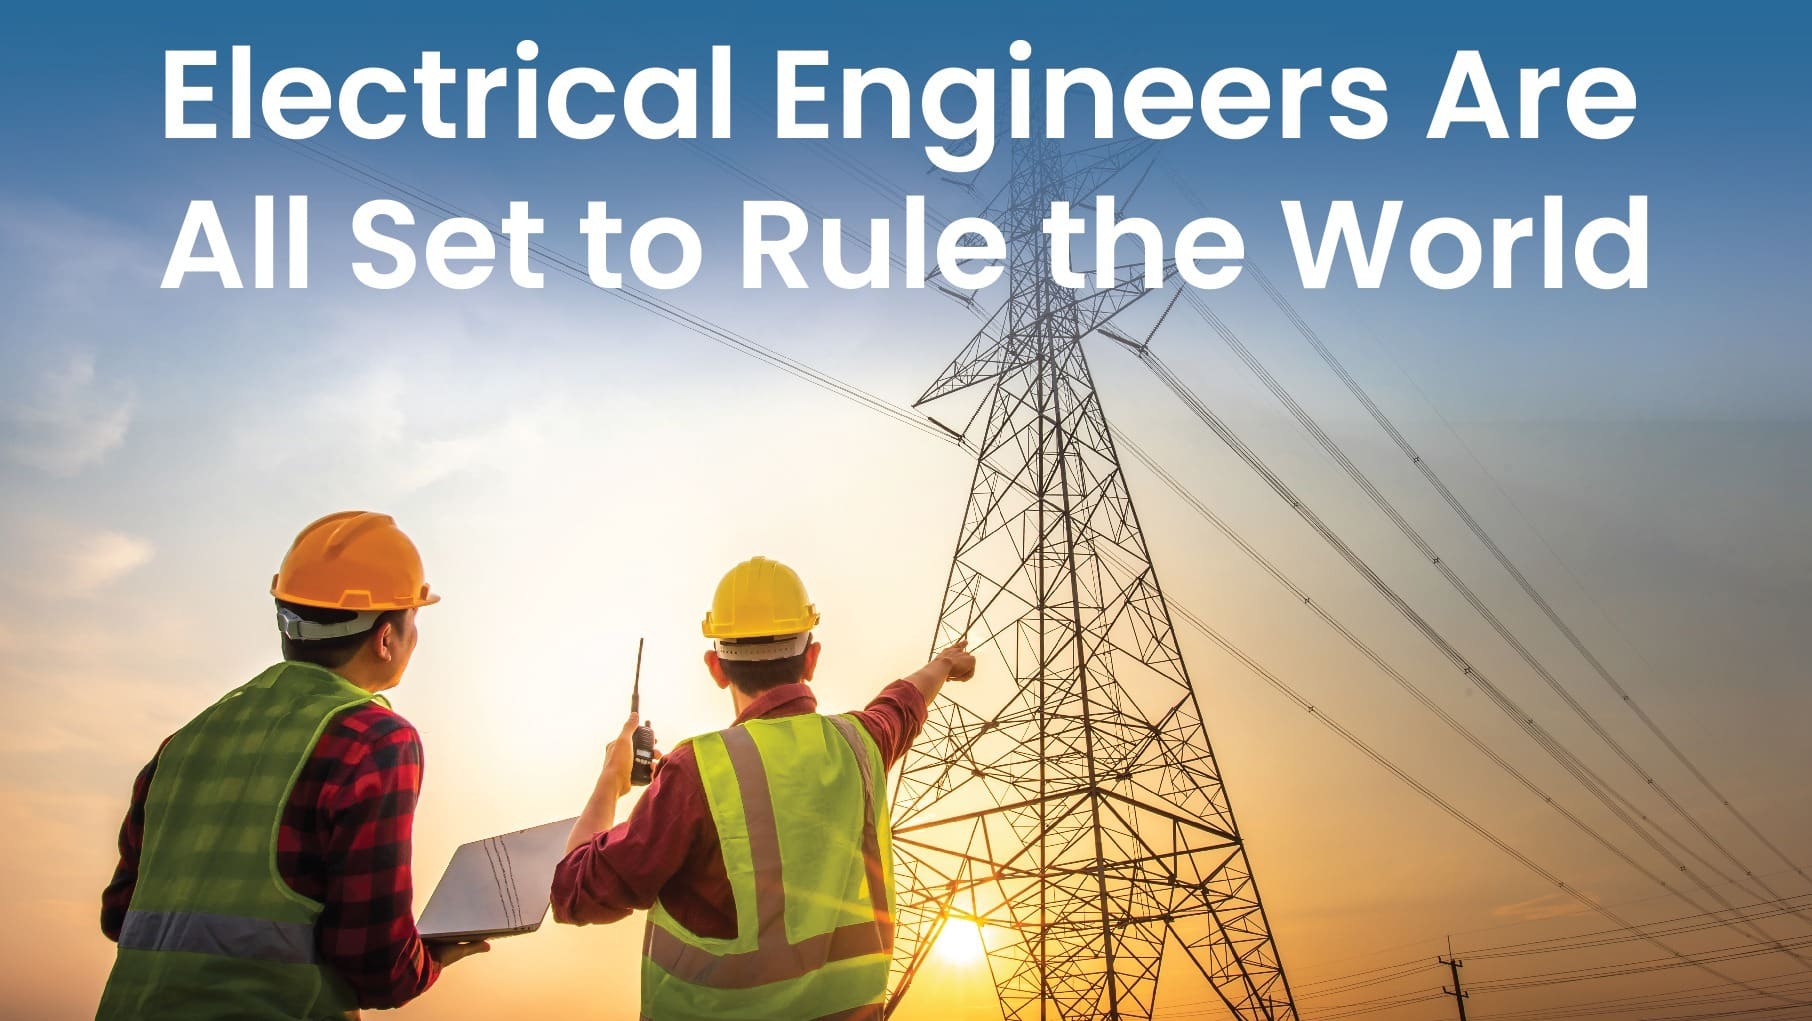 Electrical Engineers Are All Set to Rule the World